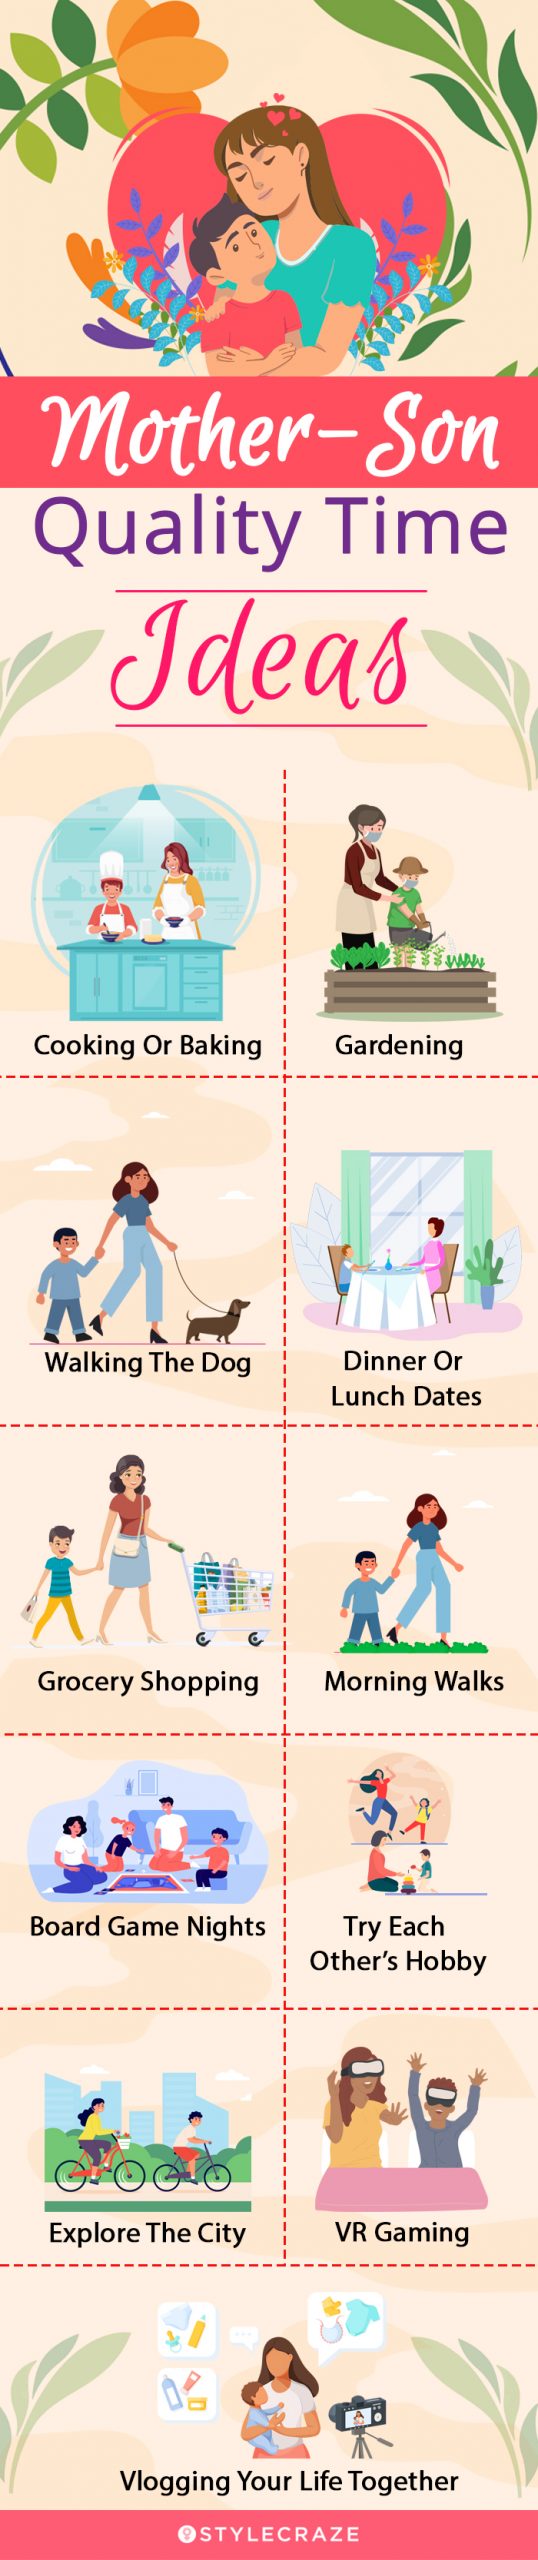 mother son quality time ideas [infographic]